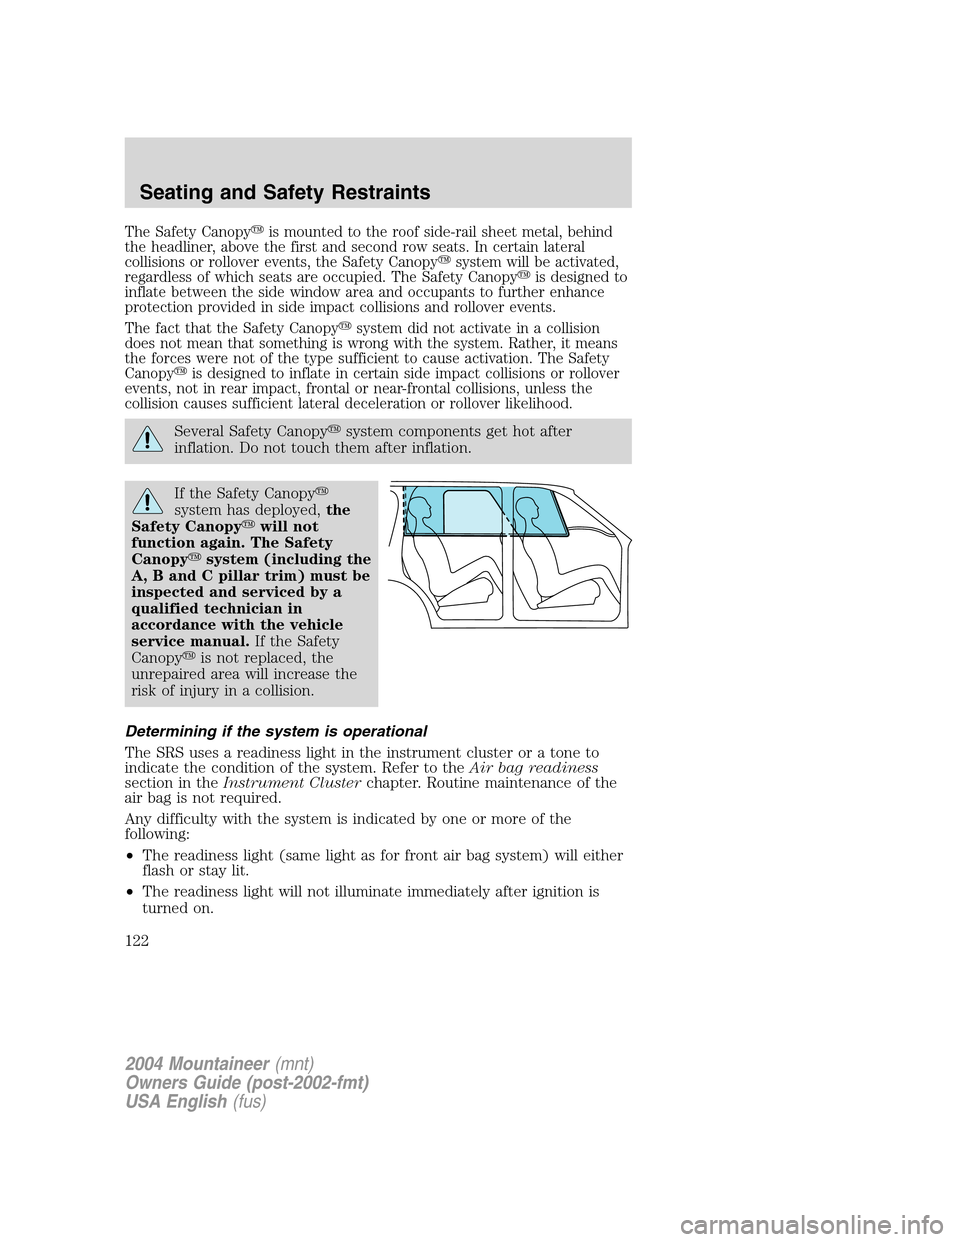 Mercury Mountaineer 2004  s User Guide The Safety Canopyis mounted to the roof side-rail sheet metal, behind
the headliner, above the first and second row seats. In certain lateral
collisions or rollover events, the Safety Canopysystem w